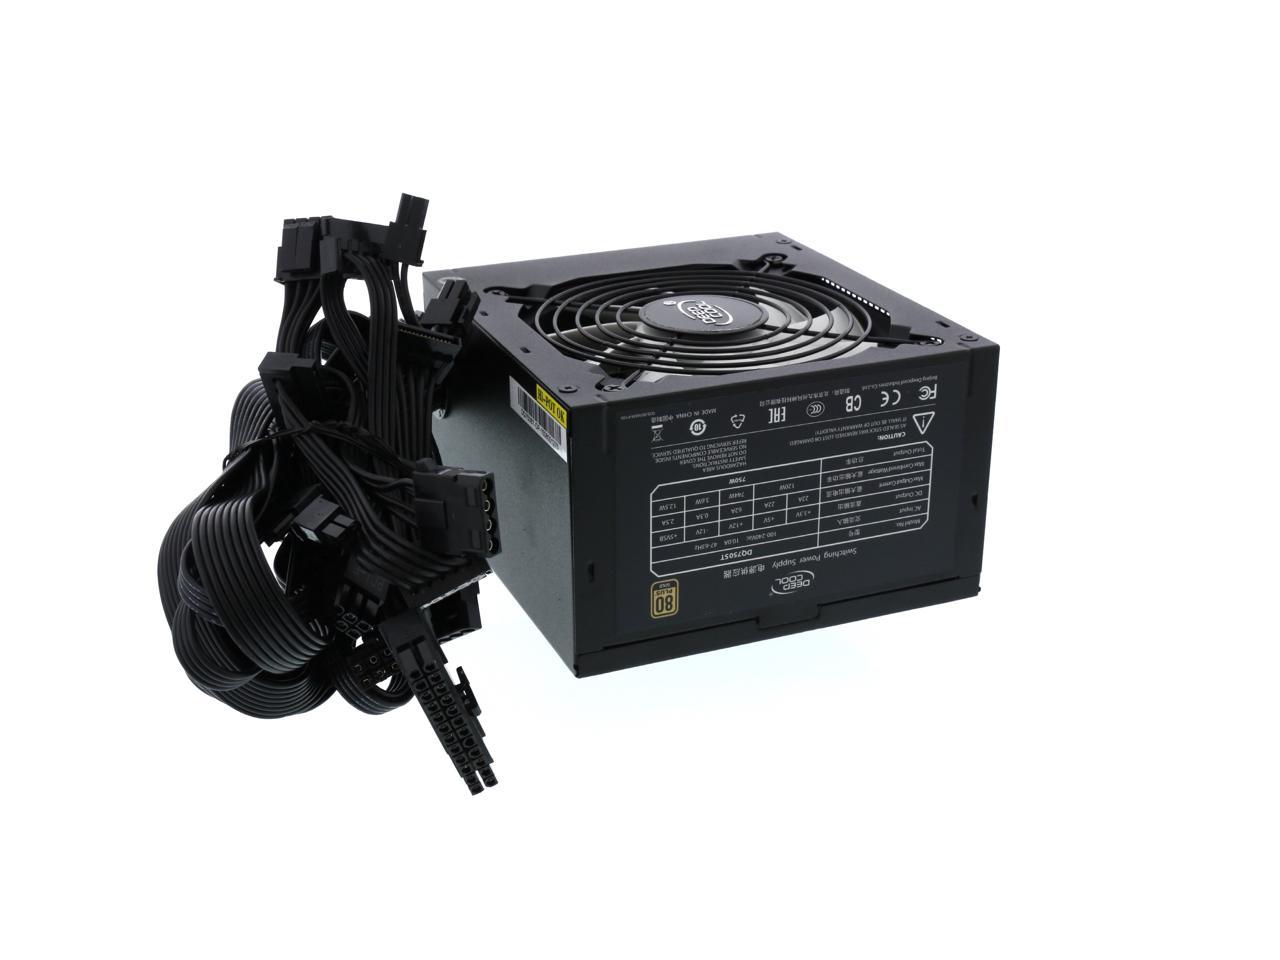 Fan Speed Controller Intel i9/i7 Gaming Power Supply 1000W Active PFC 2x PCIE 